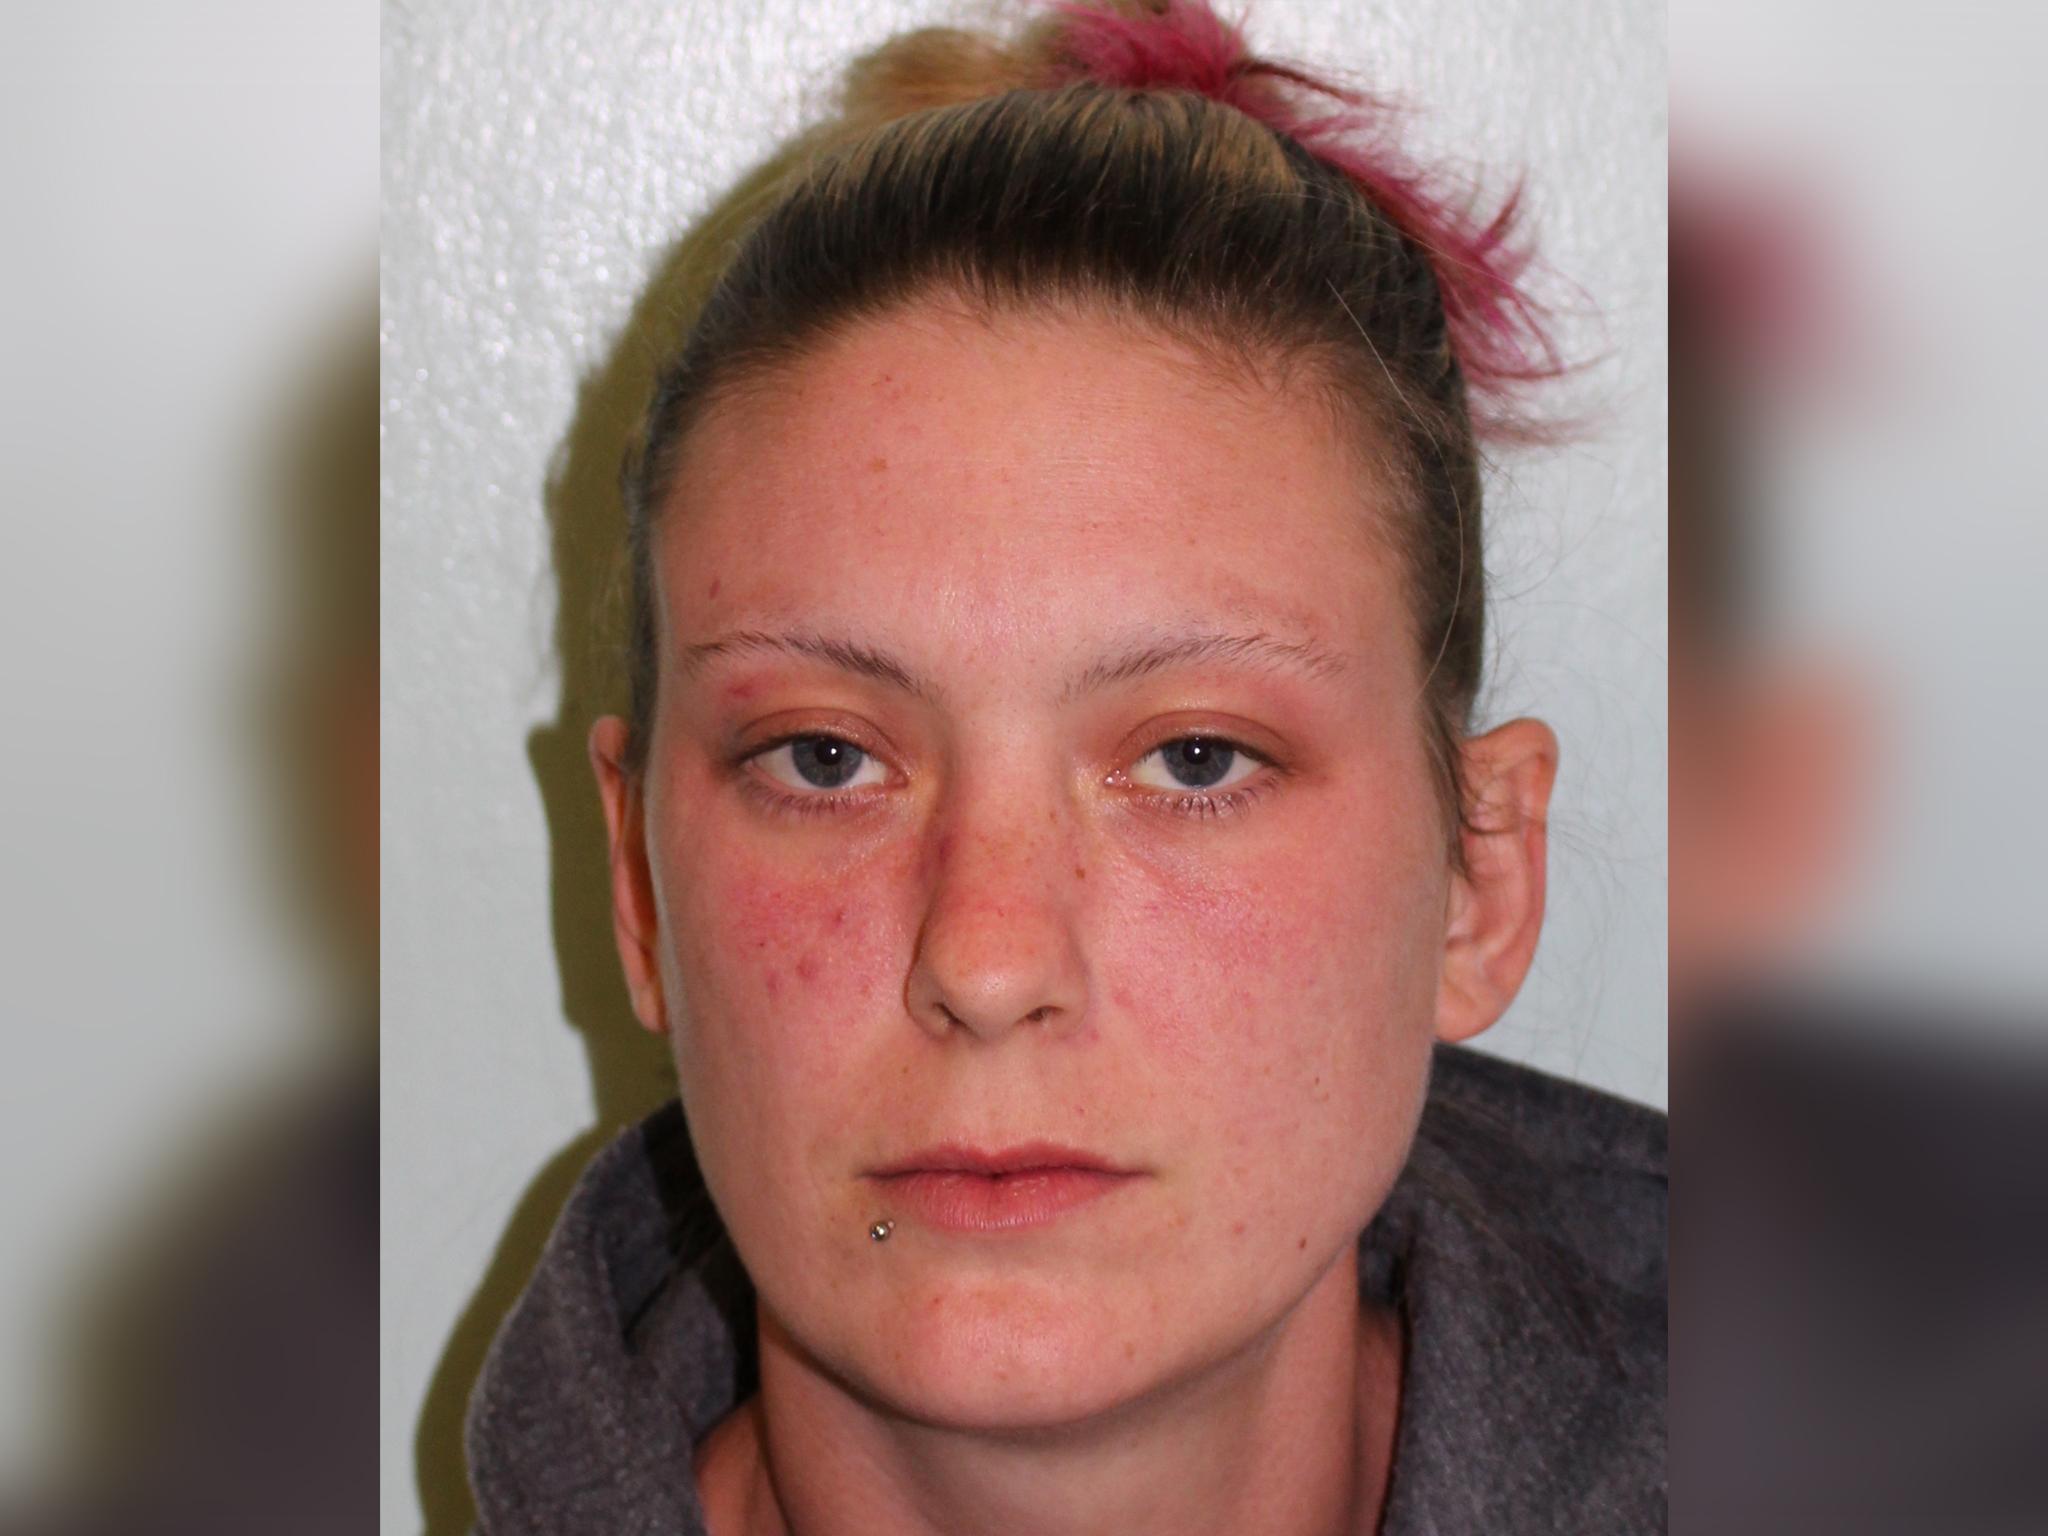 Kelly Wolf, 28, of Enfield, has been jailed for grooming a teenage boy